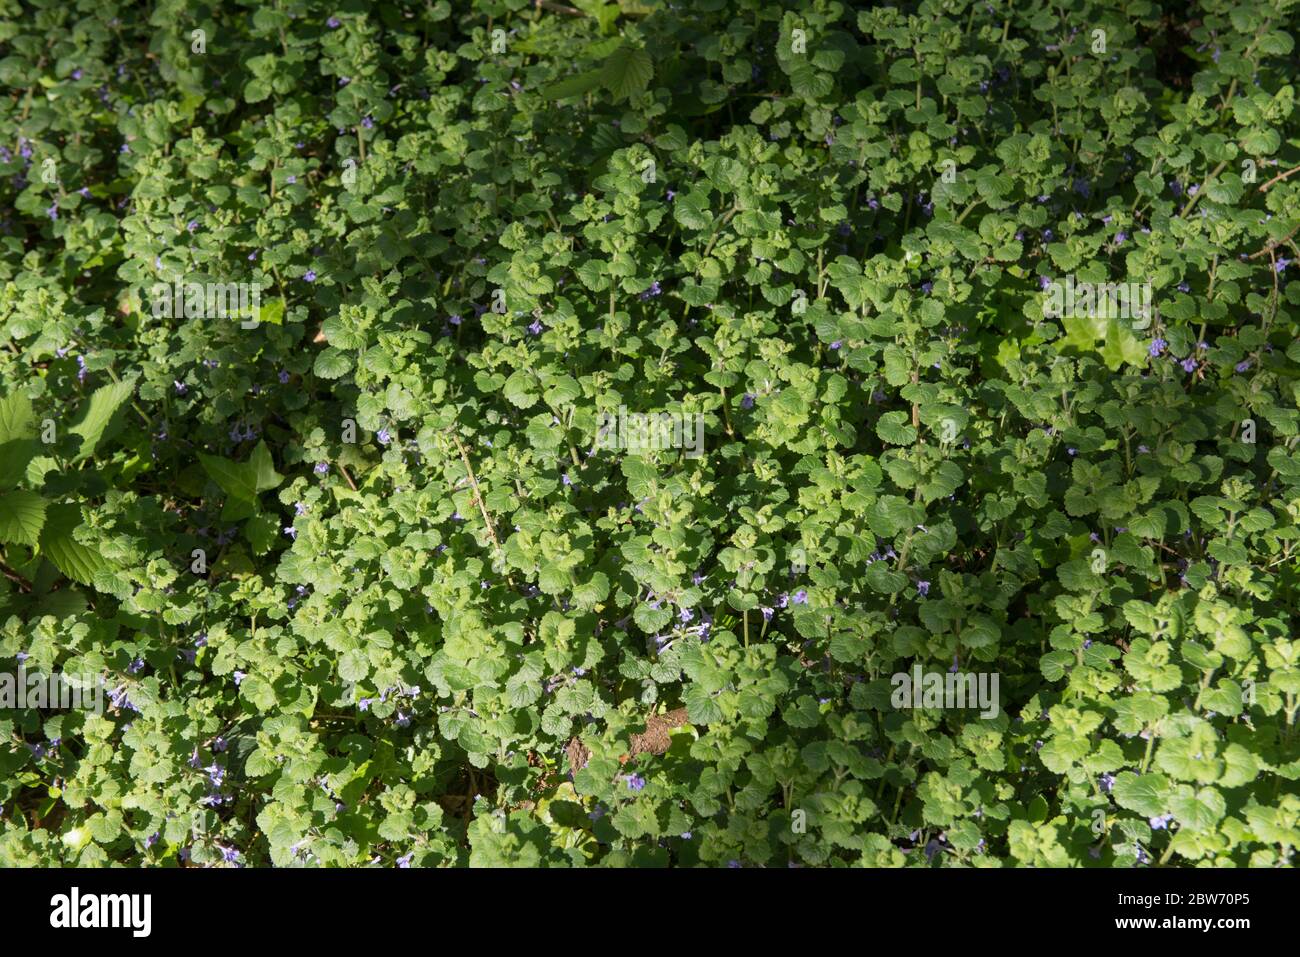 Spring Flowering of the Clump Forming Ground Ivy Plant (Glechoma hederacea) Growing on the Floor of a Forest in Rural Devon, England, UK Stock Photo